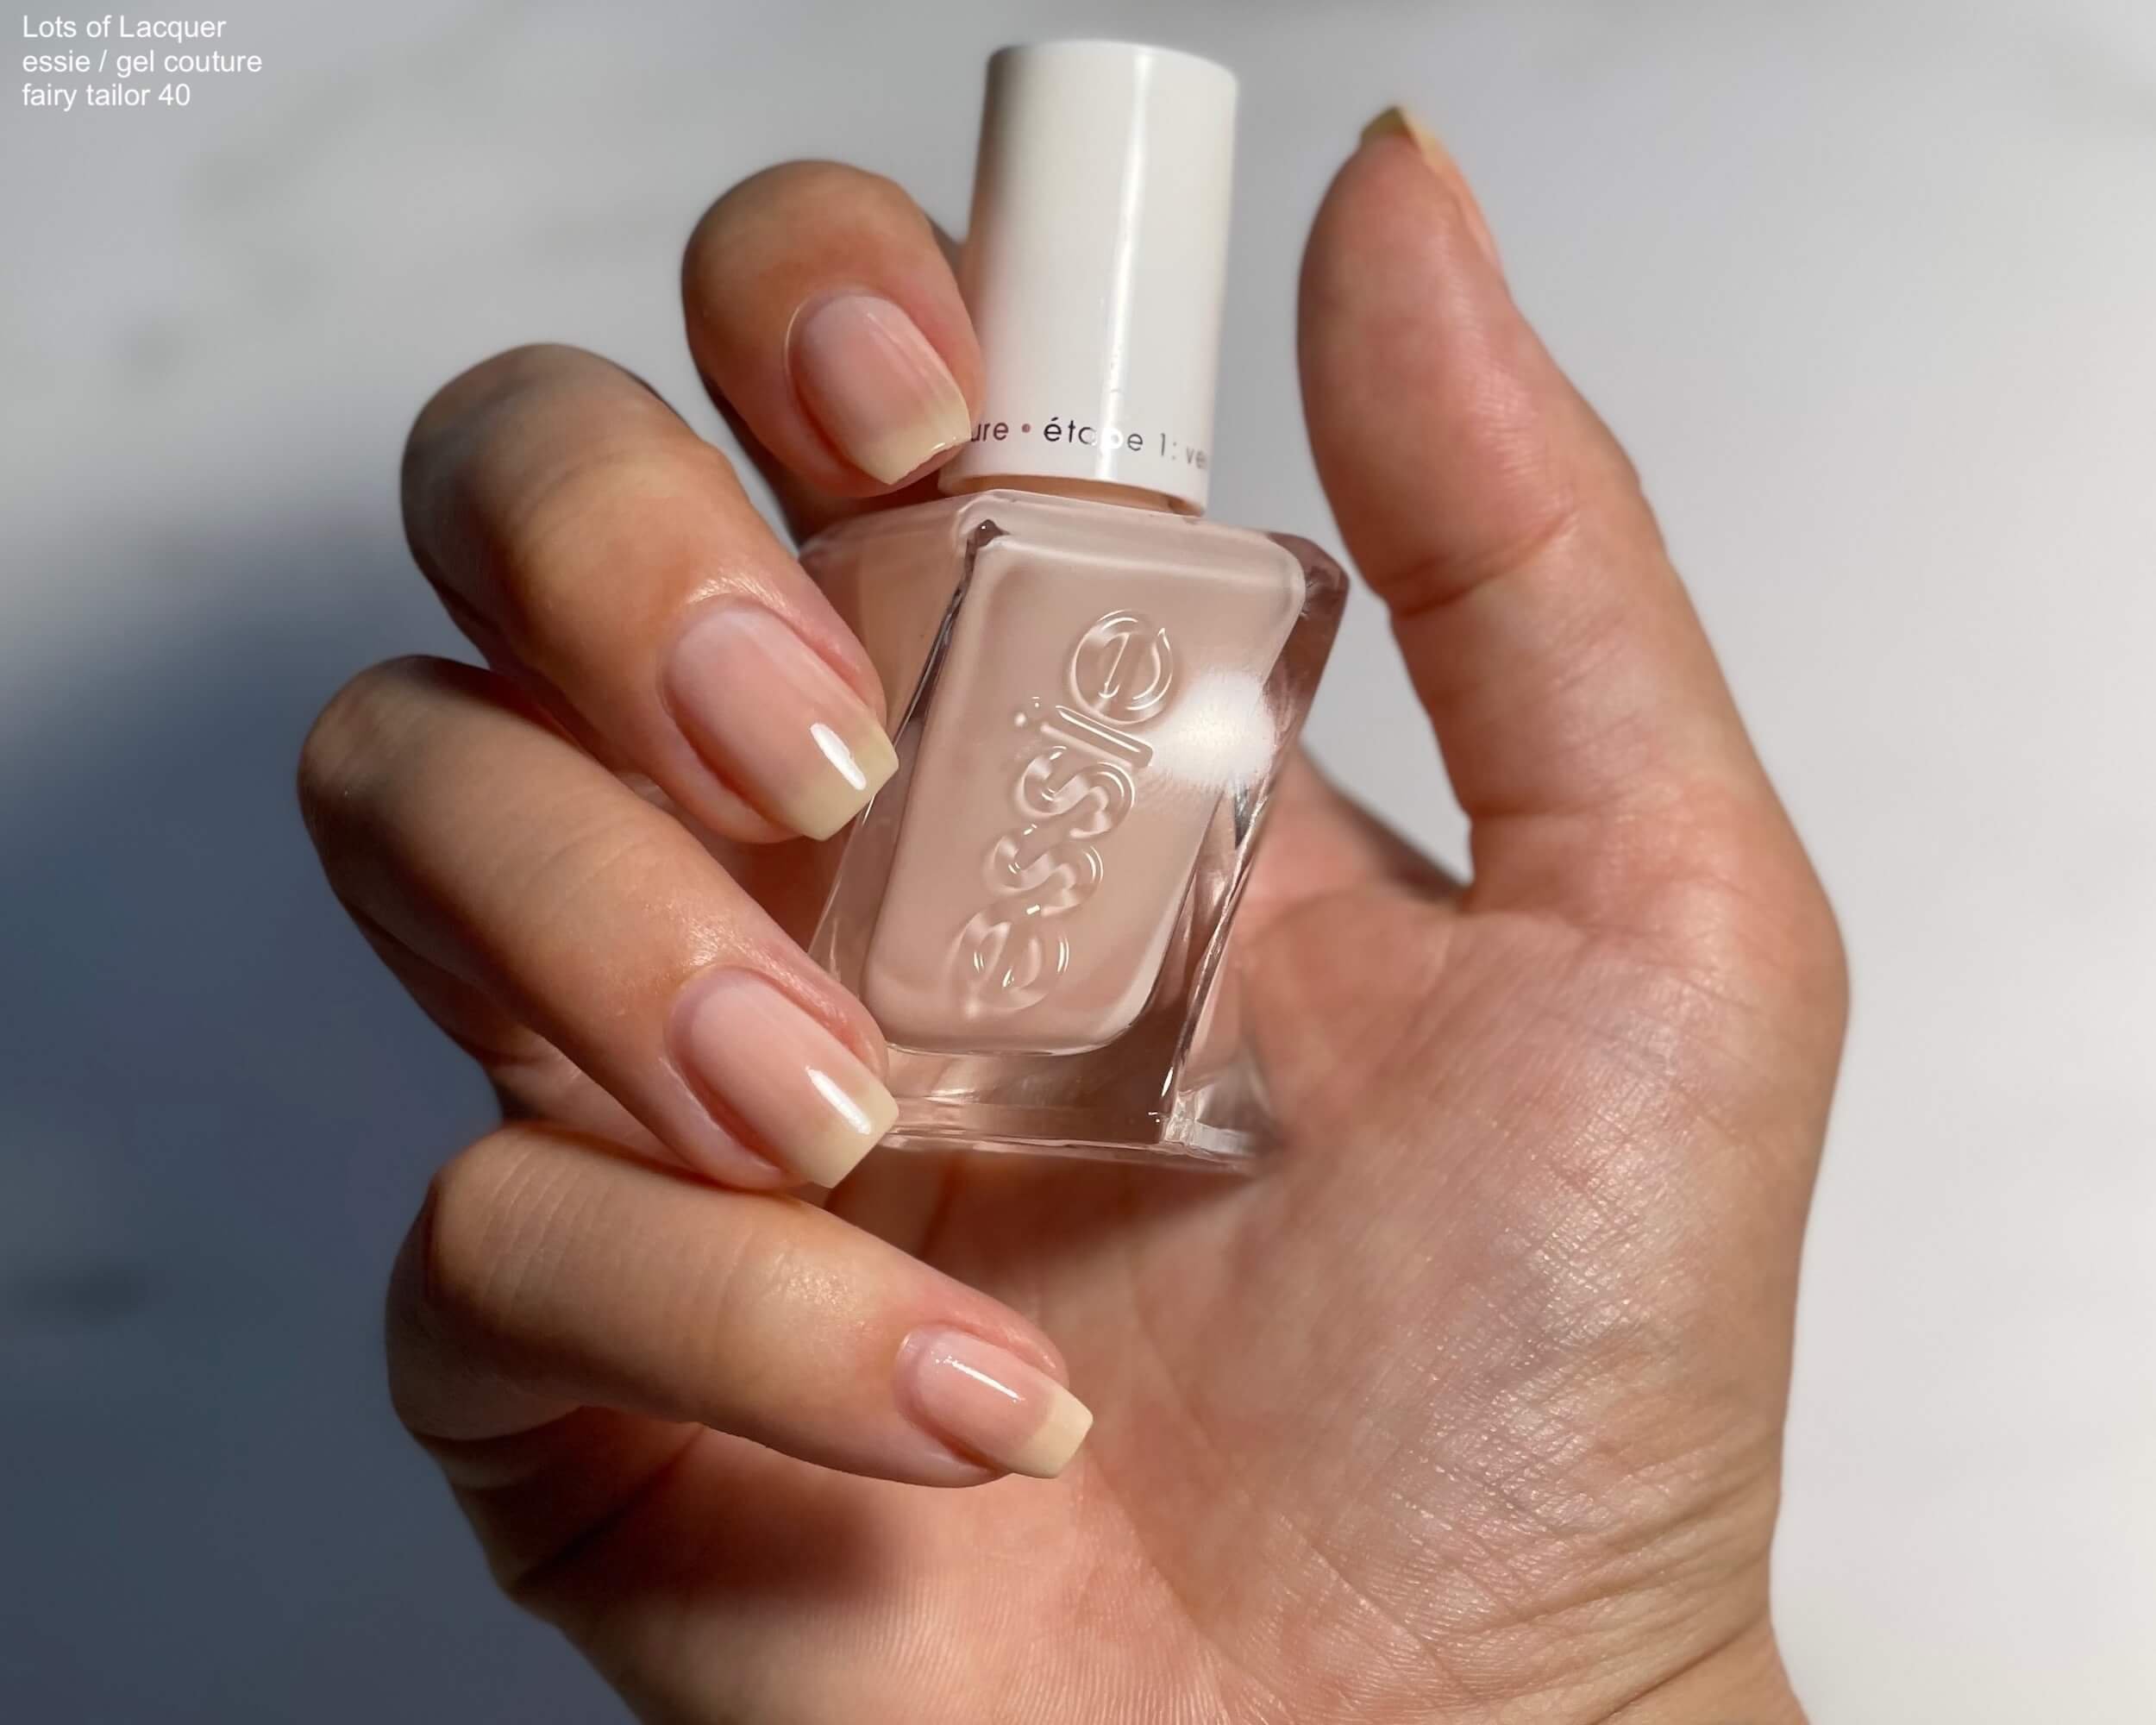 8. Essie Gel Couture Nail Polish in "Fairy Tailor" - wide 5